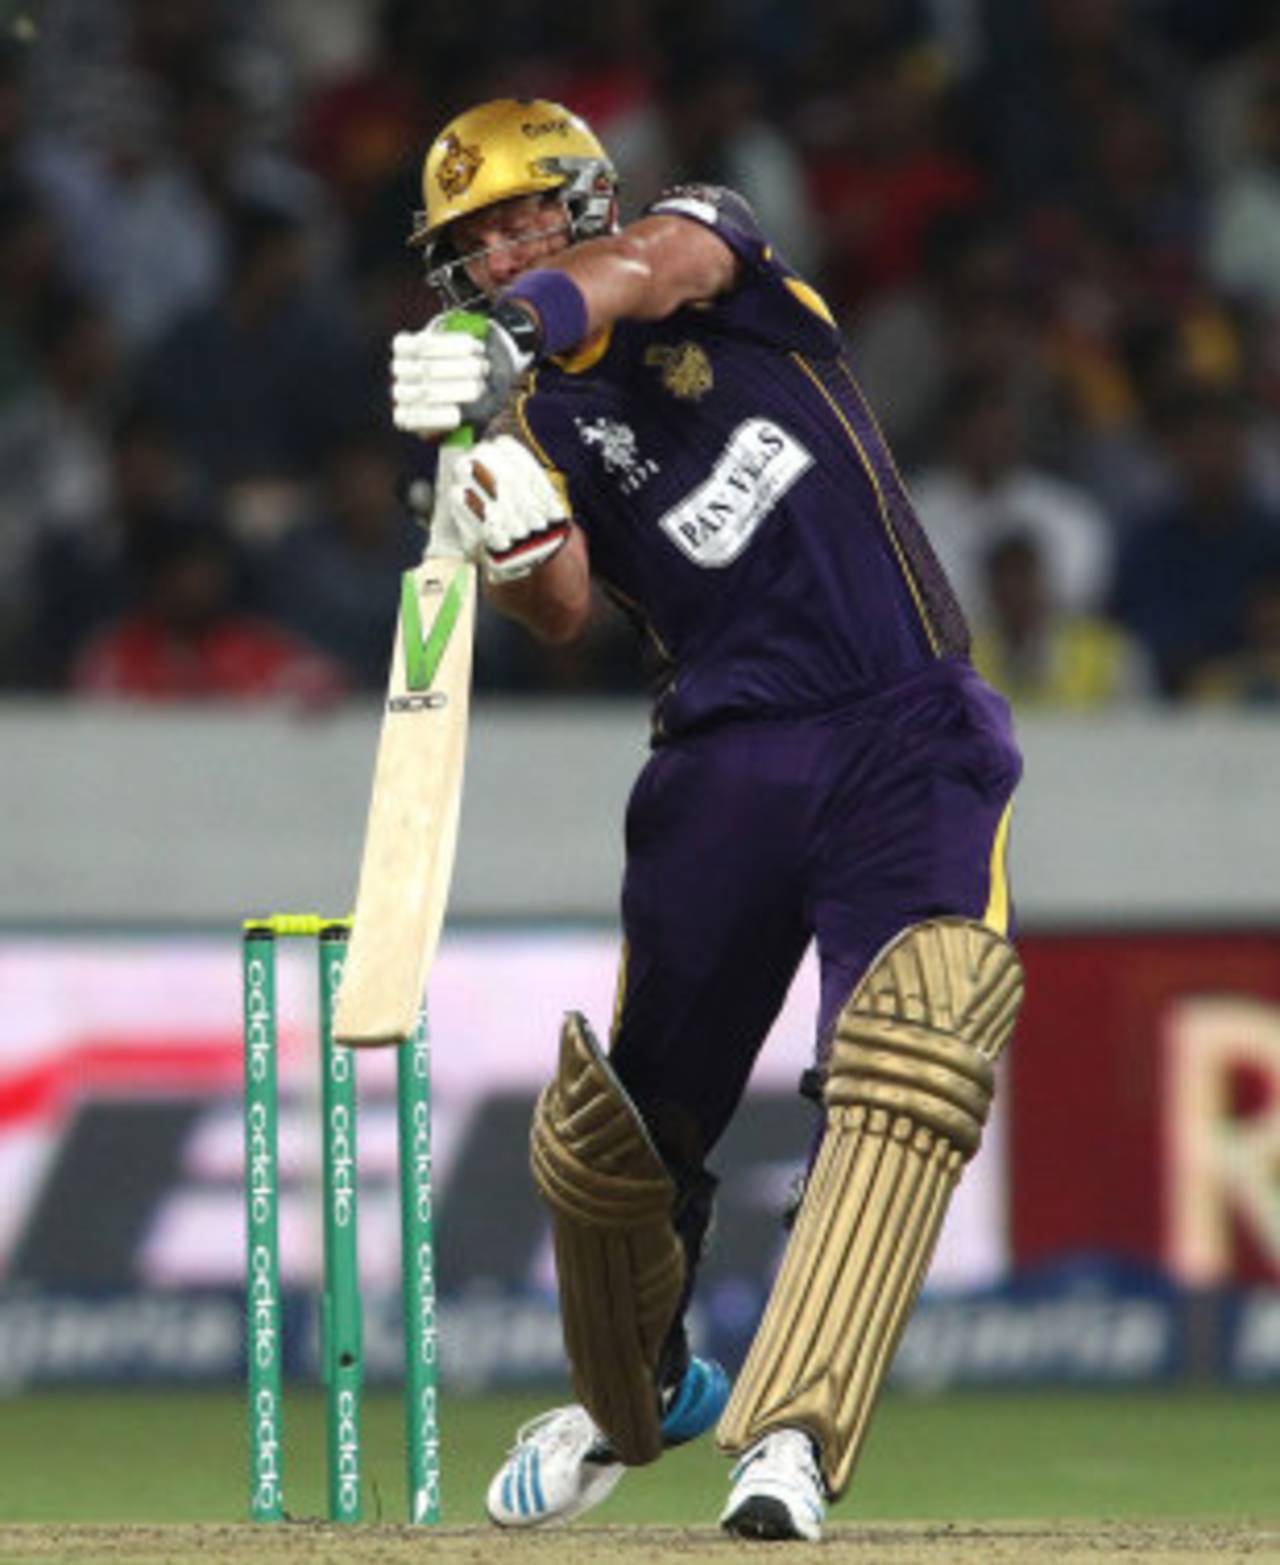 Jacques Kallis had scores of 6 and 6 before scoring a fifty against Hobart Hurricanes in the semi-final&nbsp;&nbsp;&bull;&nbsp;&nbsp;BCCI